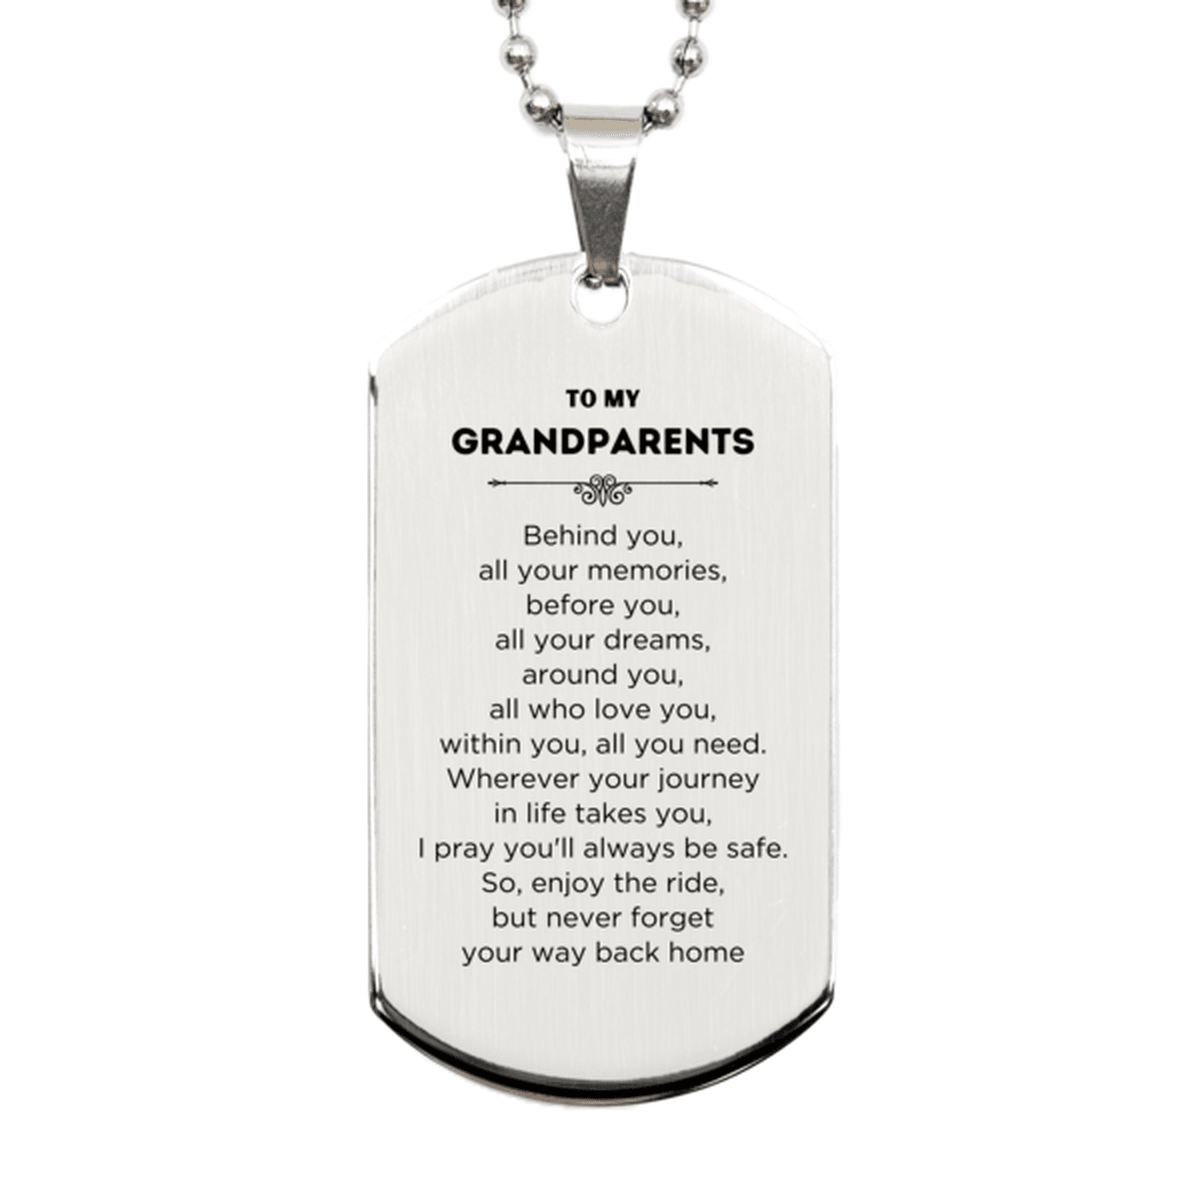 To My Grandparents Gifts, Inspirational Grandparents Silver Dog Tag, Sentimental Birthday Christmas Unique Gifts For Grandparents Behind you, all your memories, before you, all your dreams, around you, all who love you, within you, all you need - Mallard Moon Gift Shop